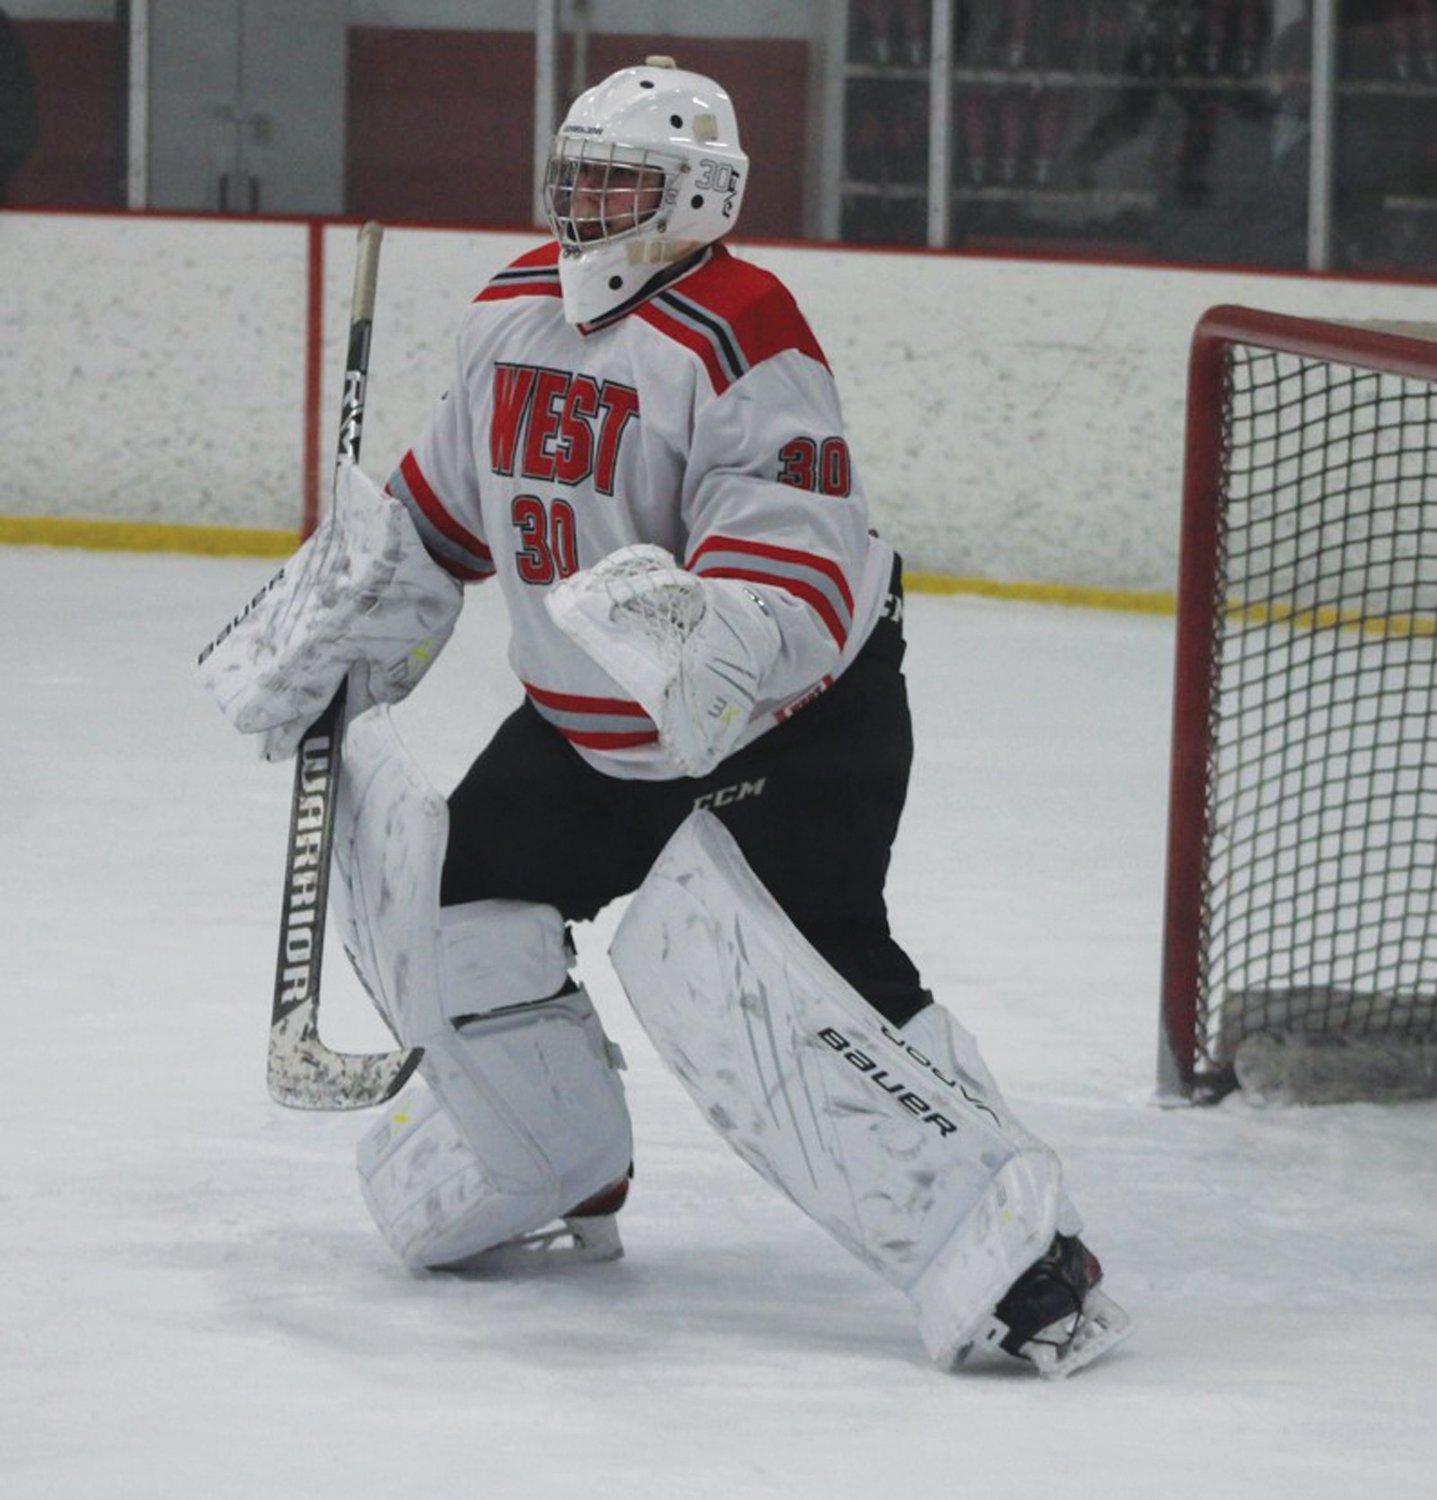 IN NET: Goalie Jaedon Case gets set to make a play in the net.